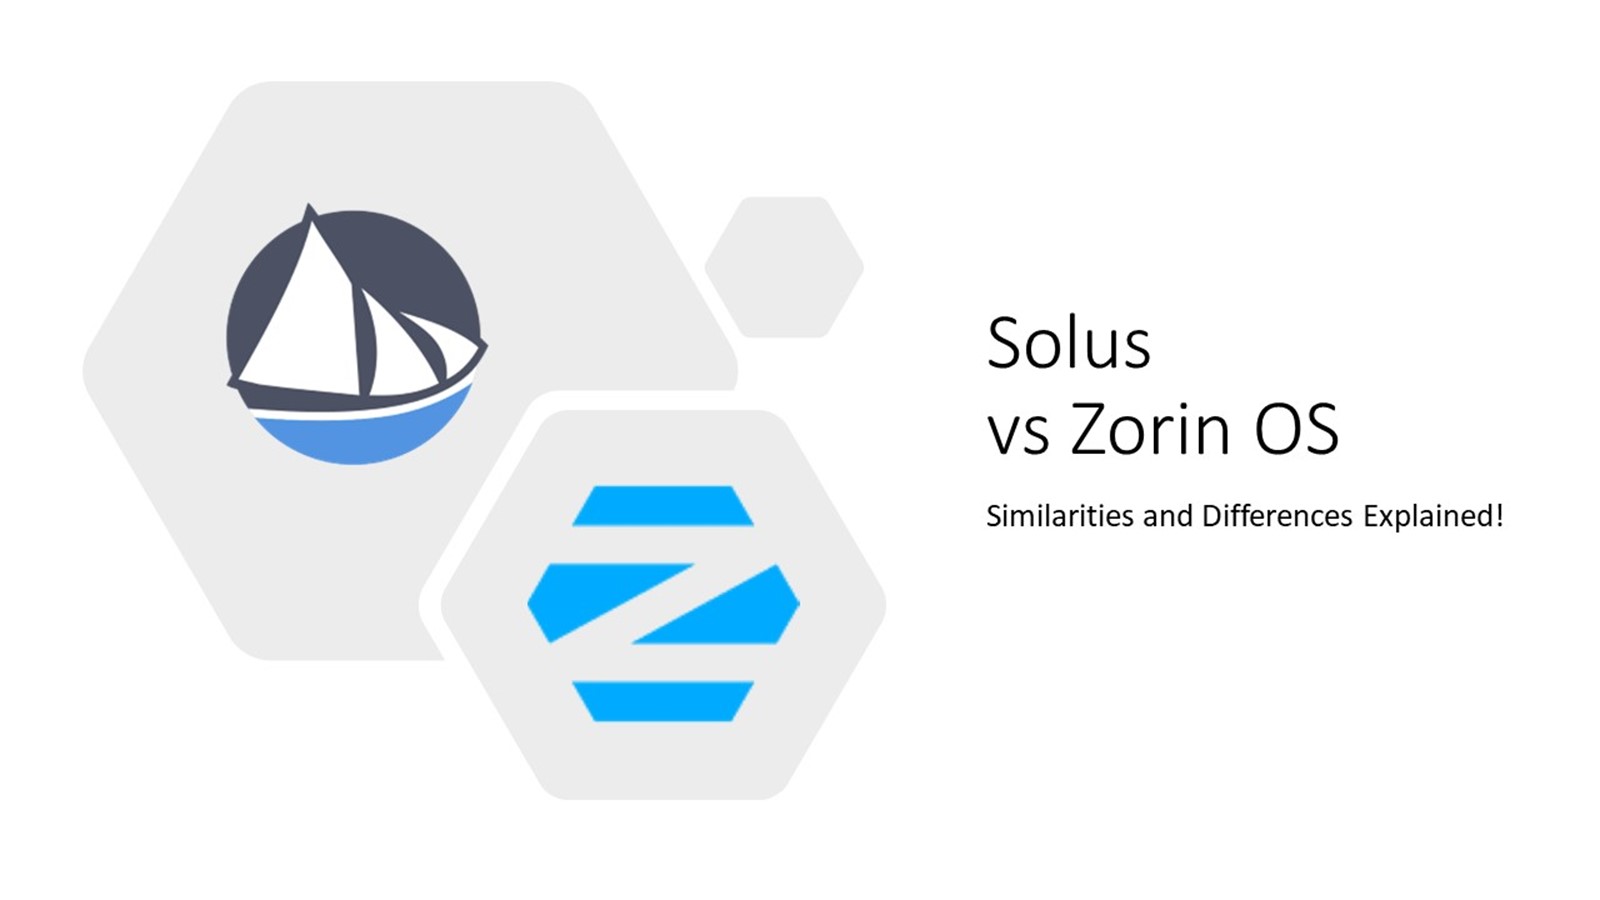 Solus vs Zorin OS: Similarities & Differences!